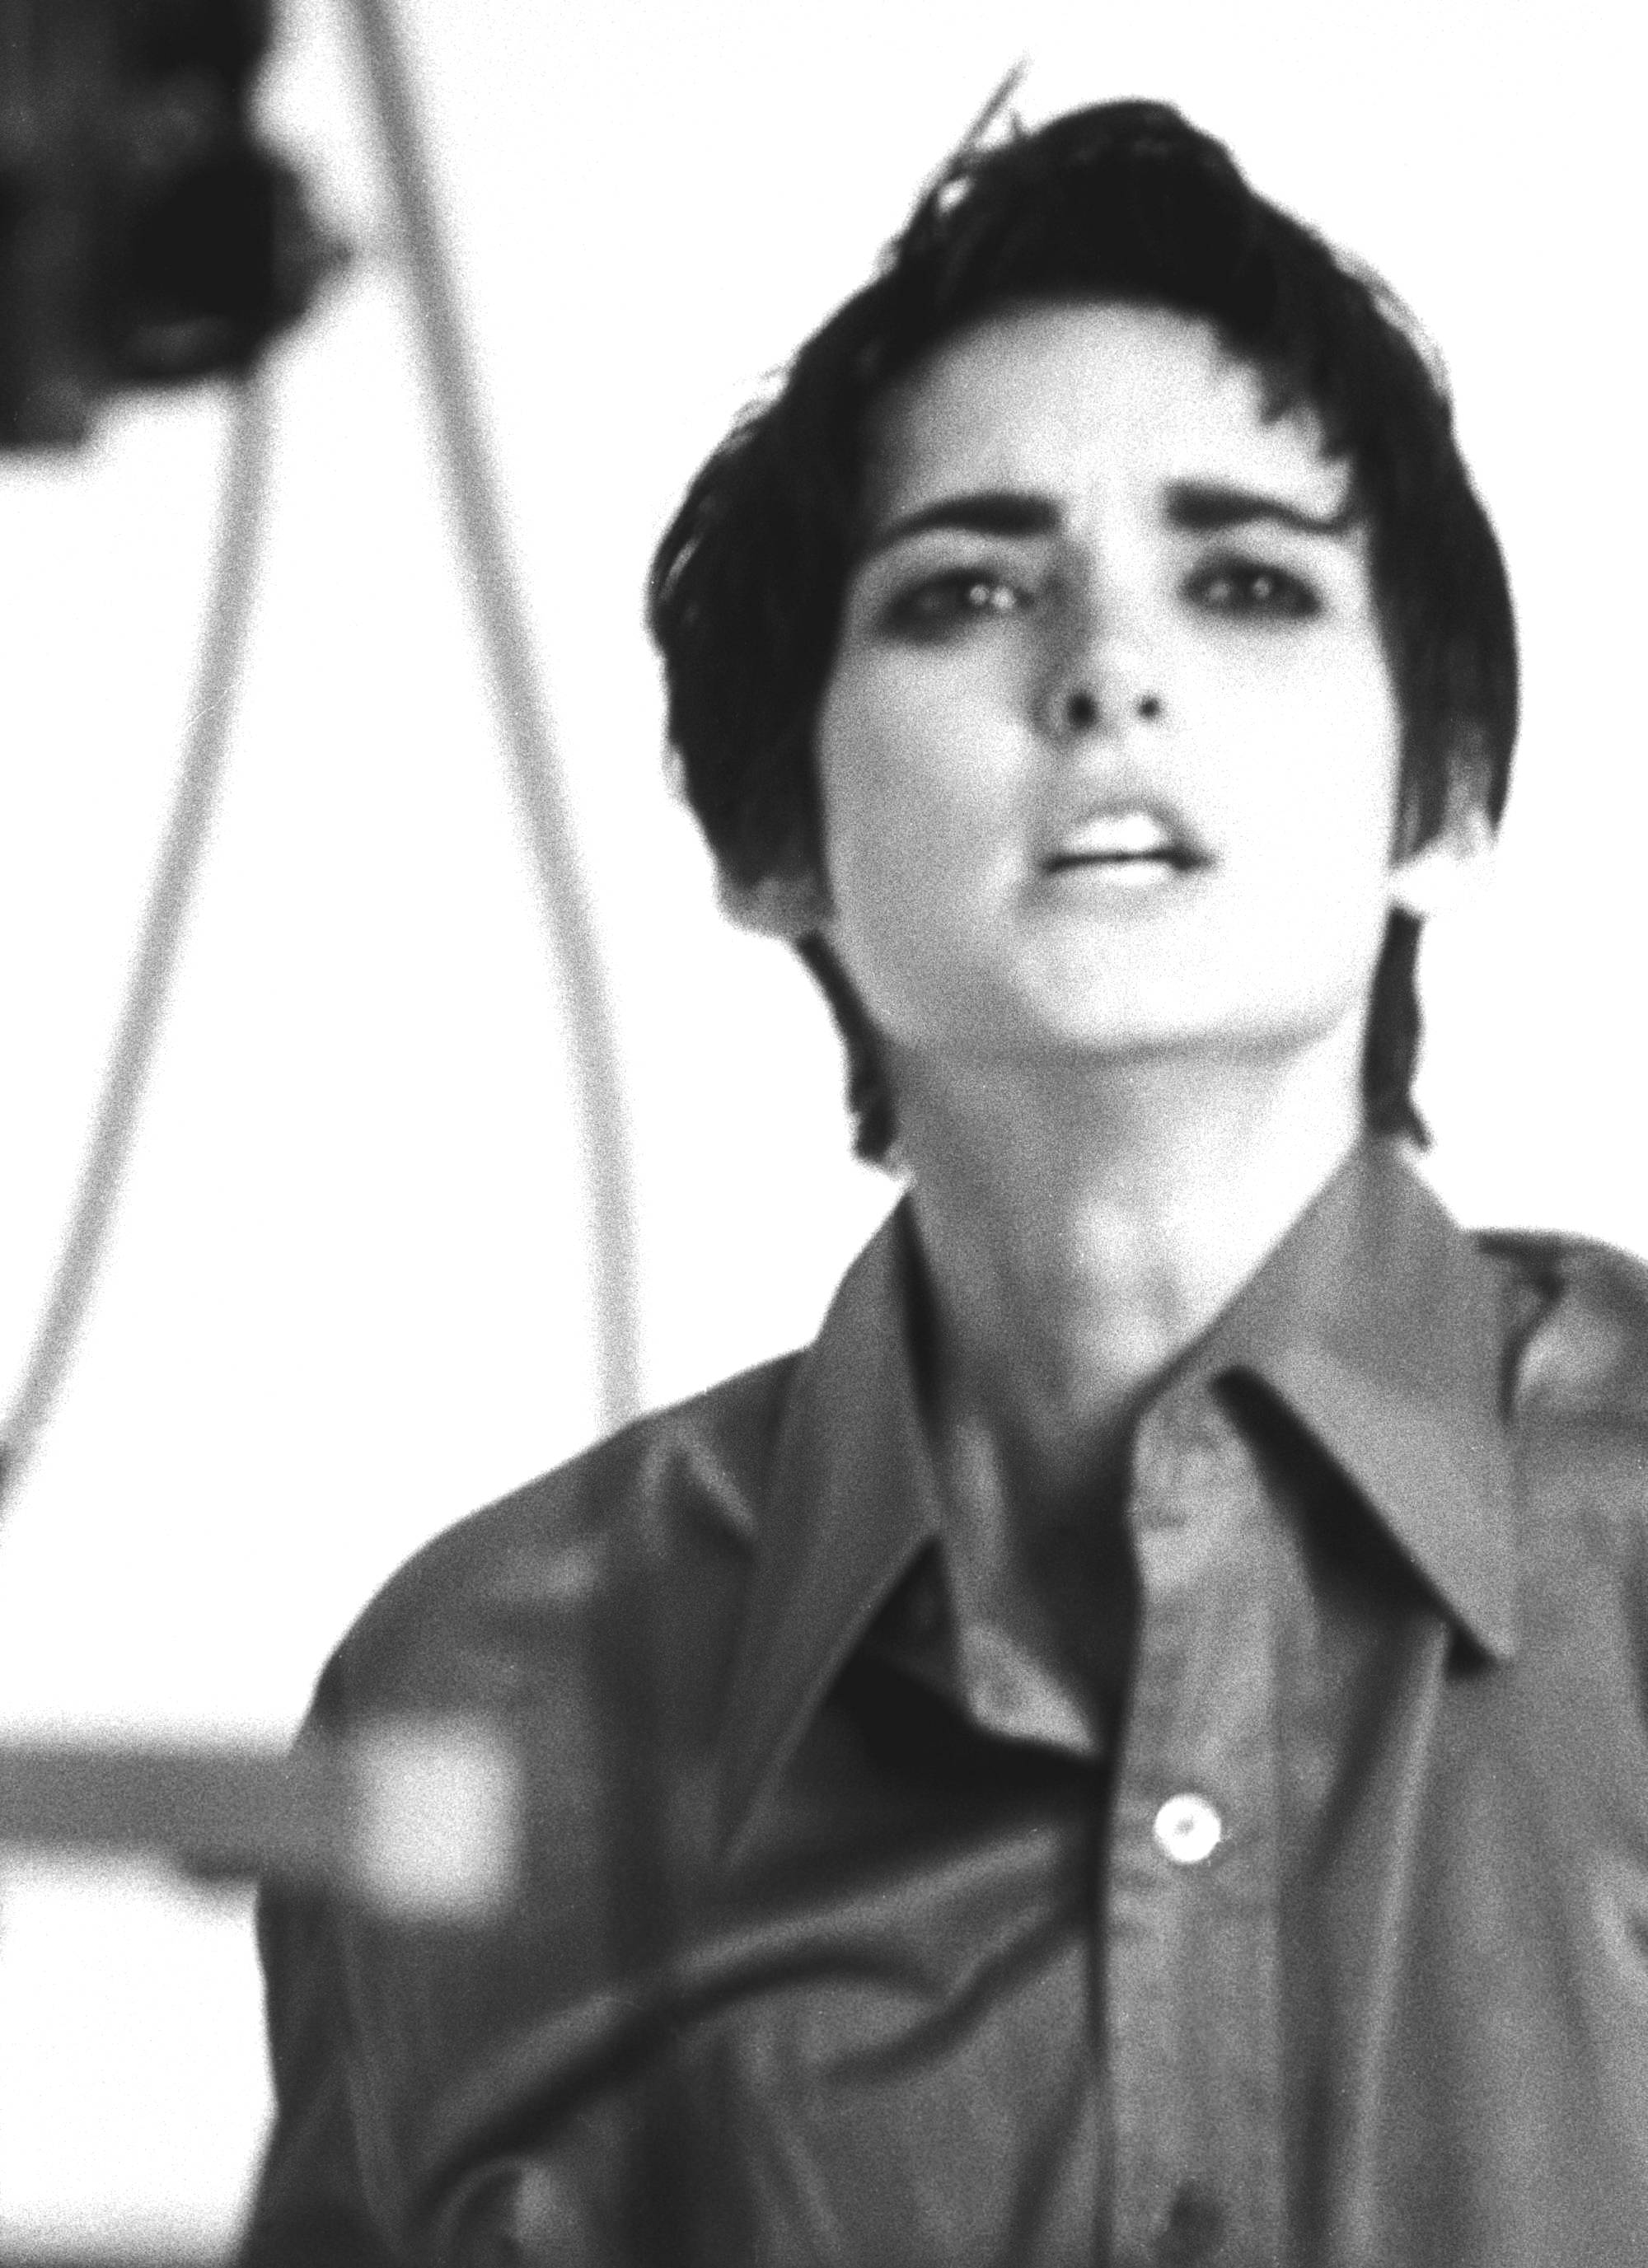 http://www.theplace.ru/archive/winona_ryder/img/wryder%20(1).jpg